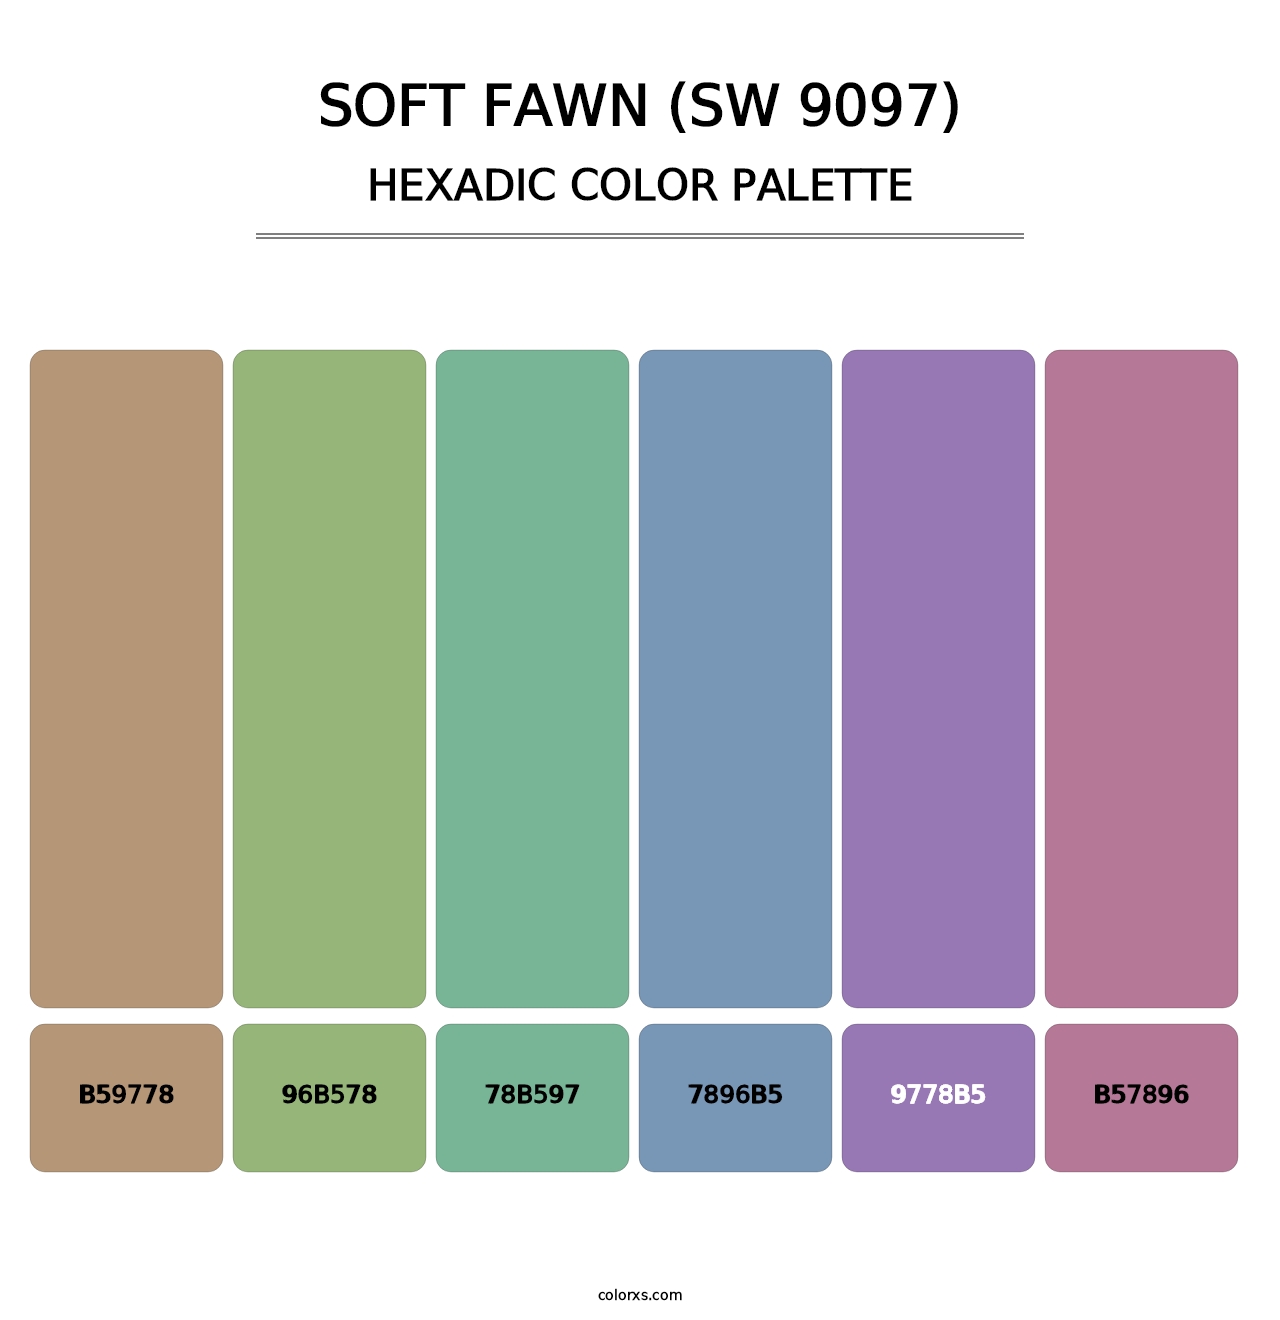 Soft Fawn (SW 9097) - Hexadic Color Palette